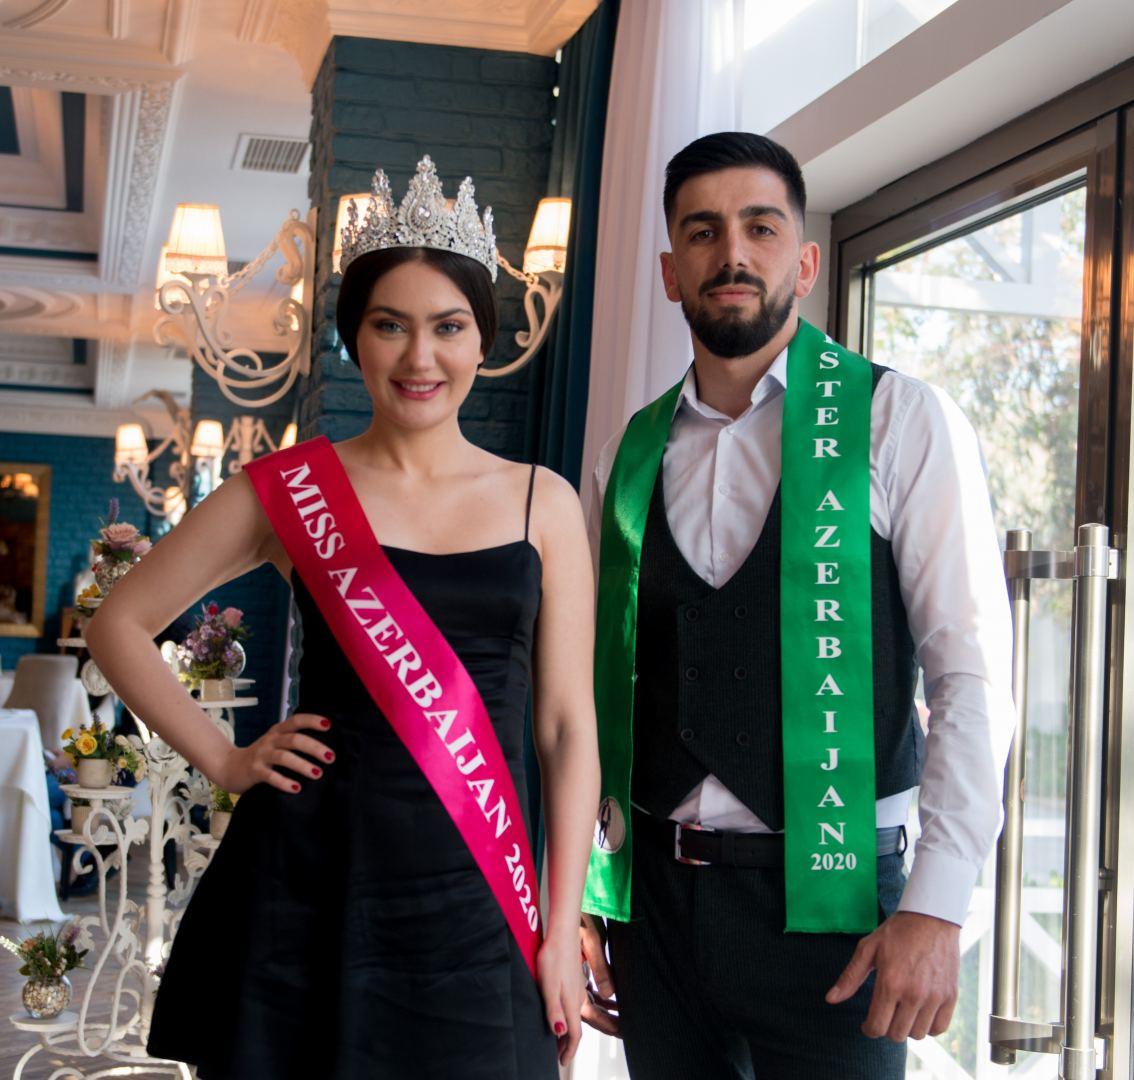 Miss & Mister Azerbaijan-2021 hosts another casting [PHOTO]